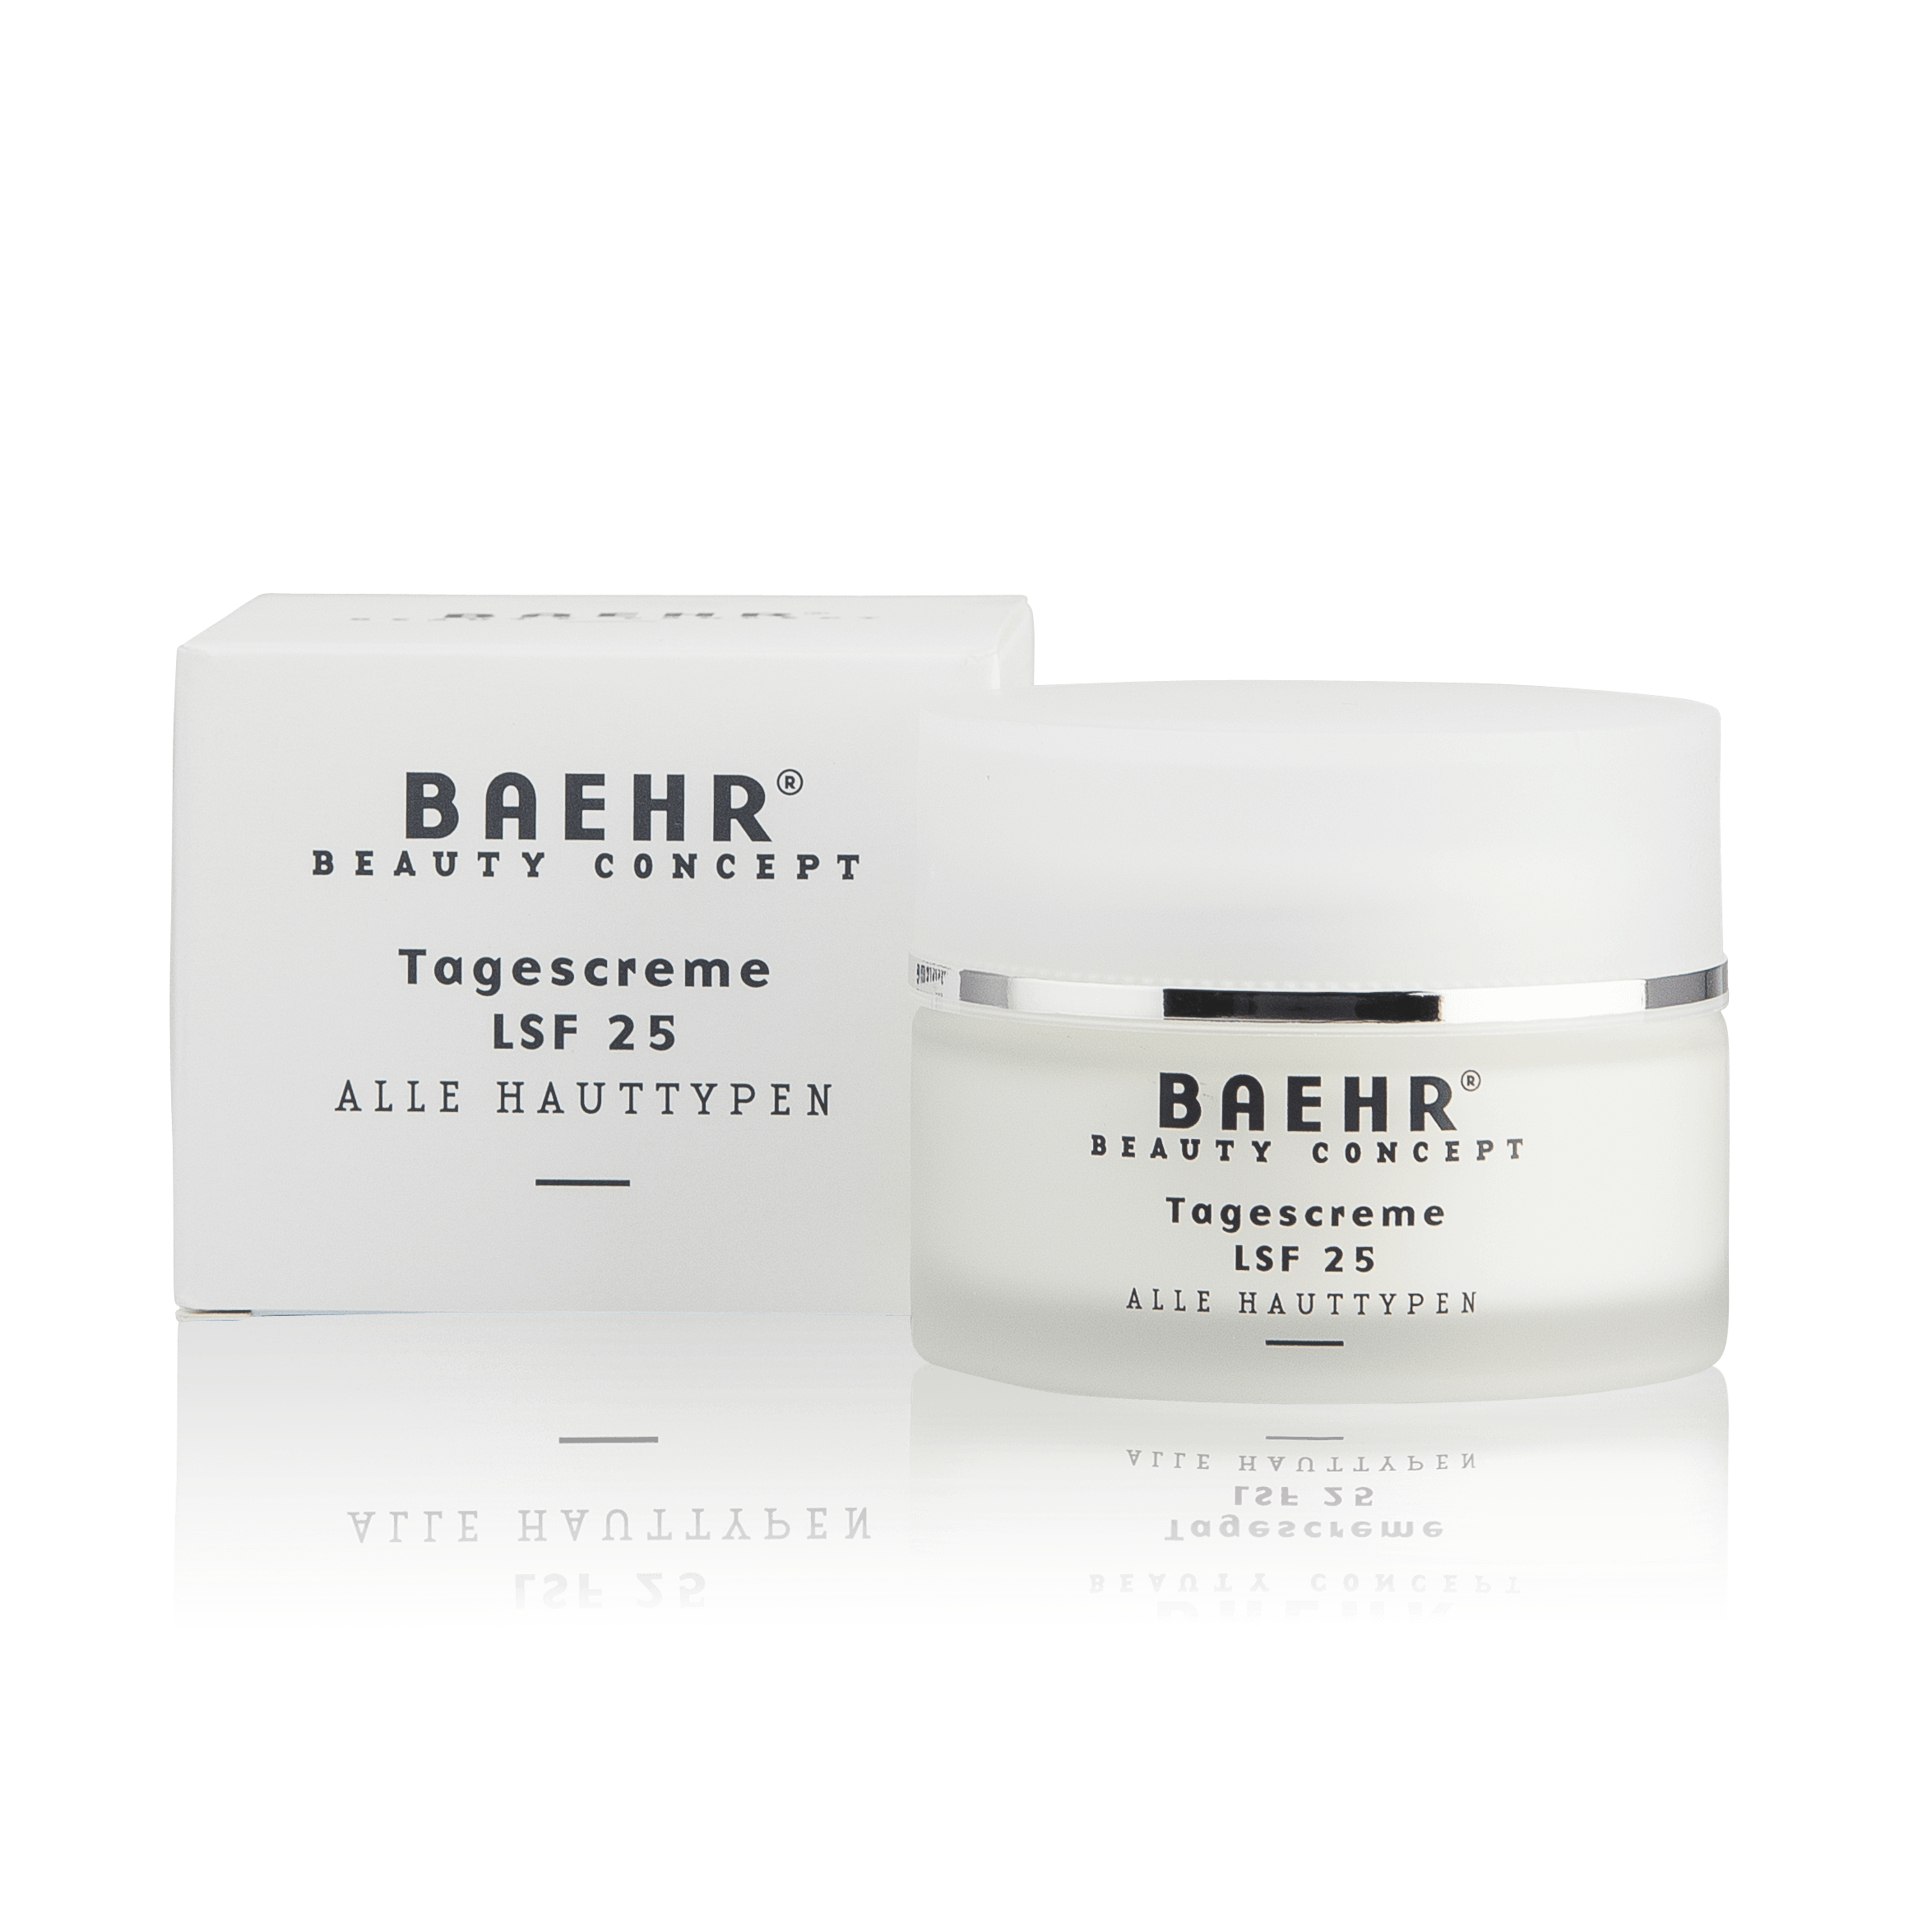 BAEHR BEAUTY CONCEPT Tagescreme LSF 25 50 ml